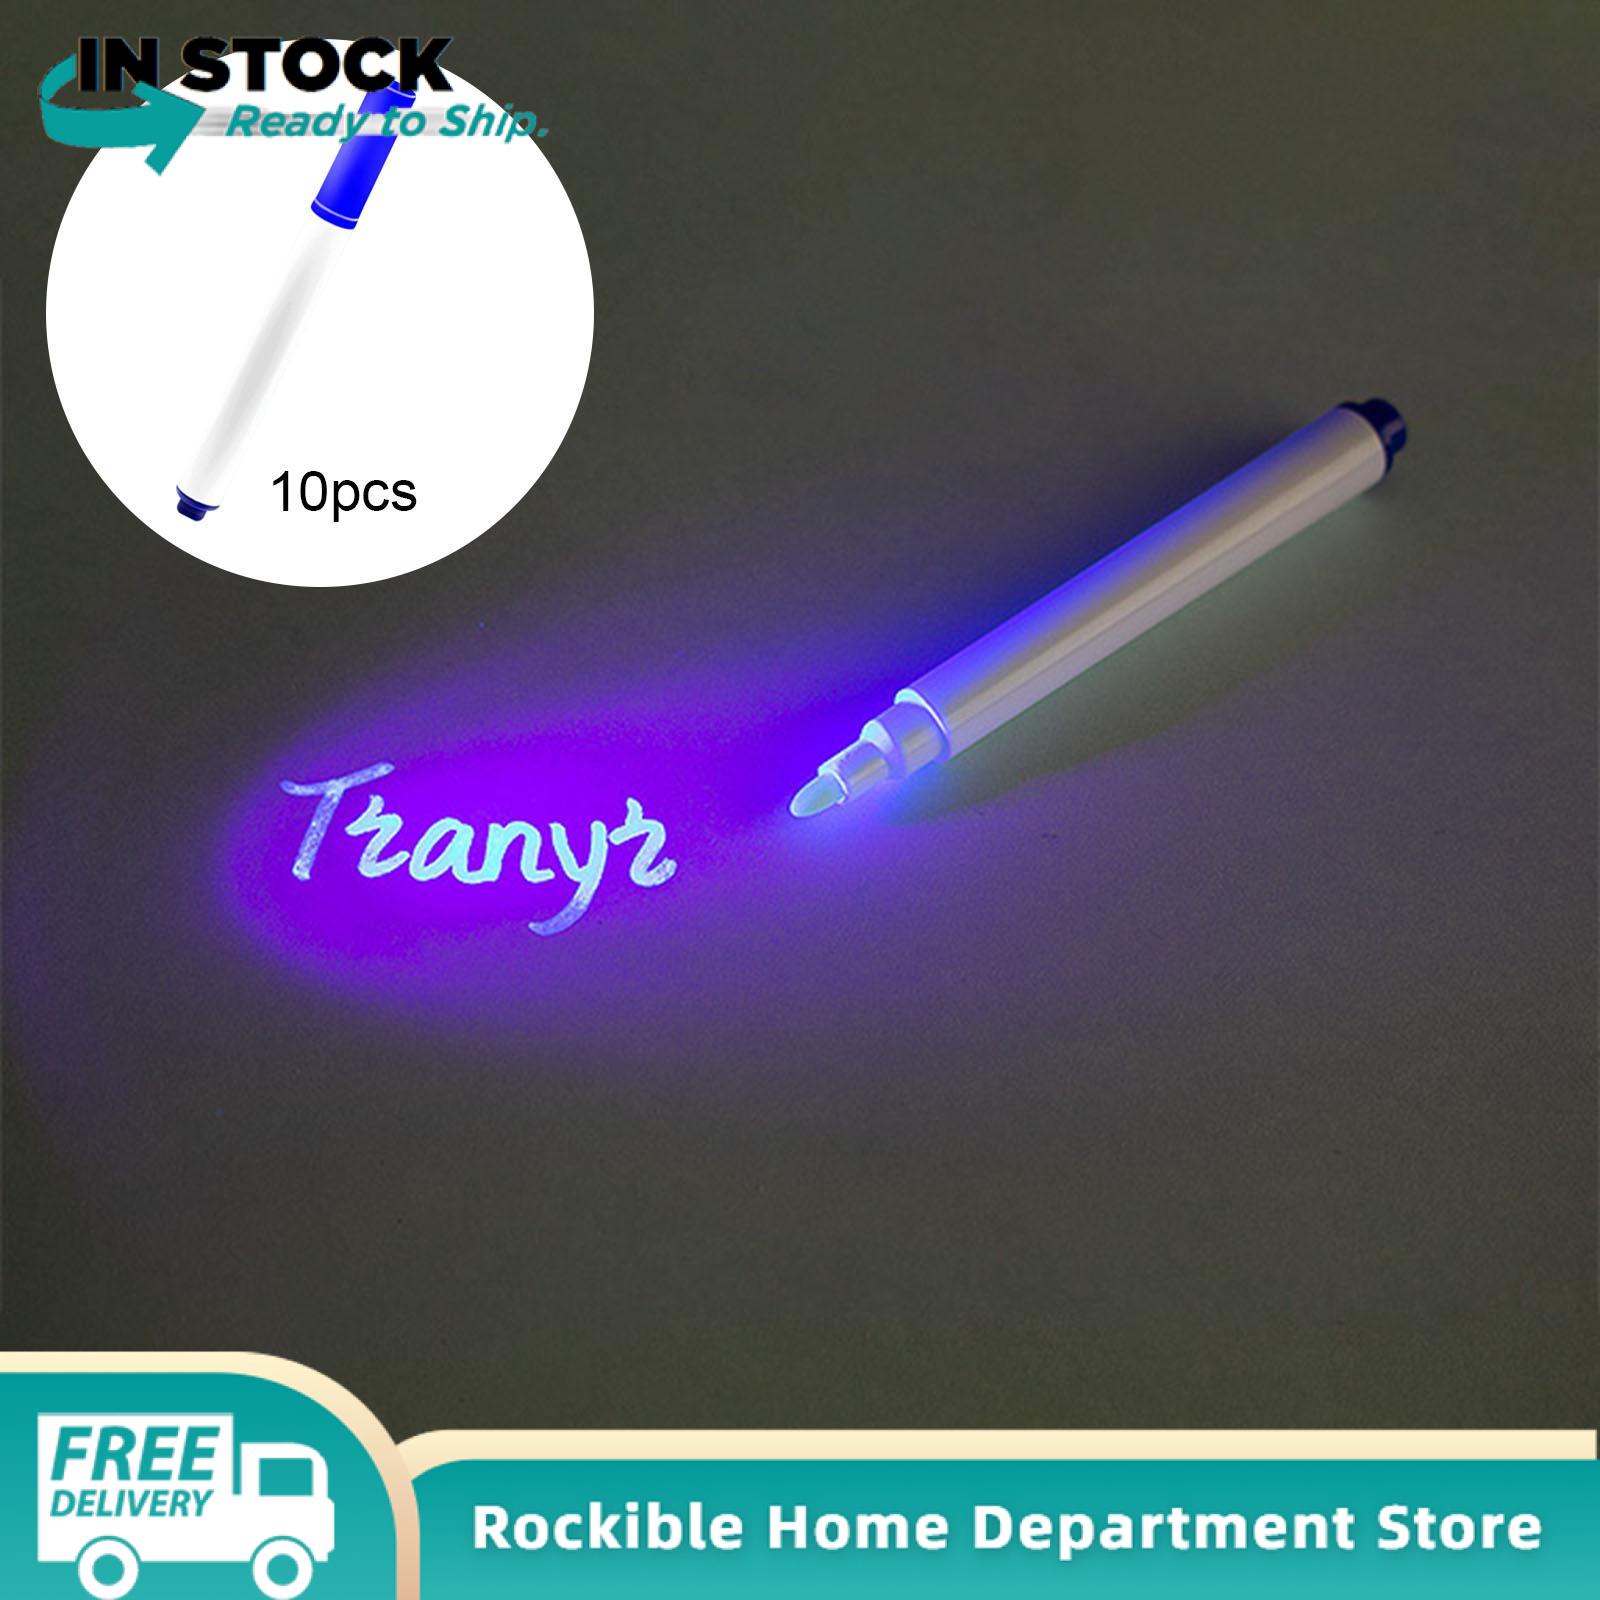 rockible 10Pcs Invisible Ink Pen Marker Pens Painting 0.5cm Round Tip